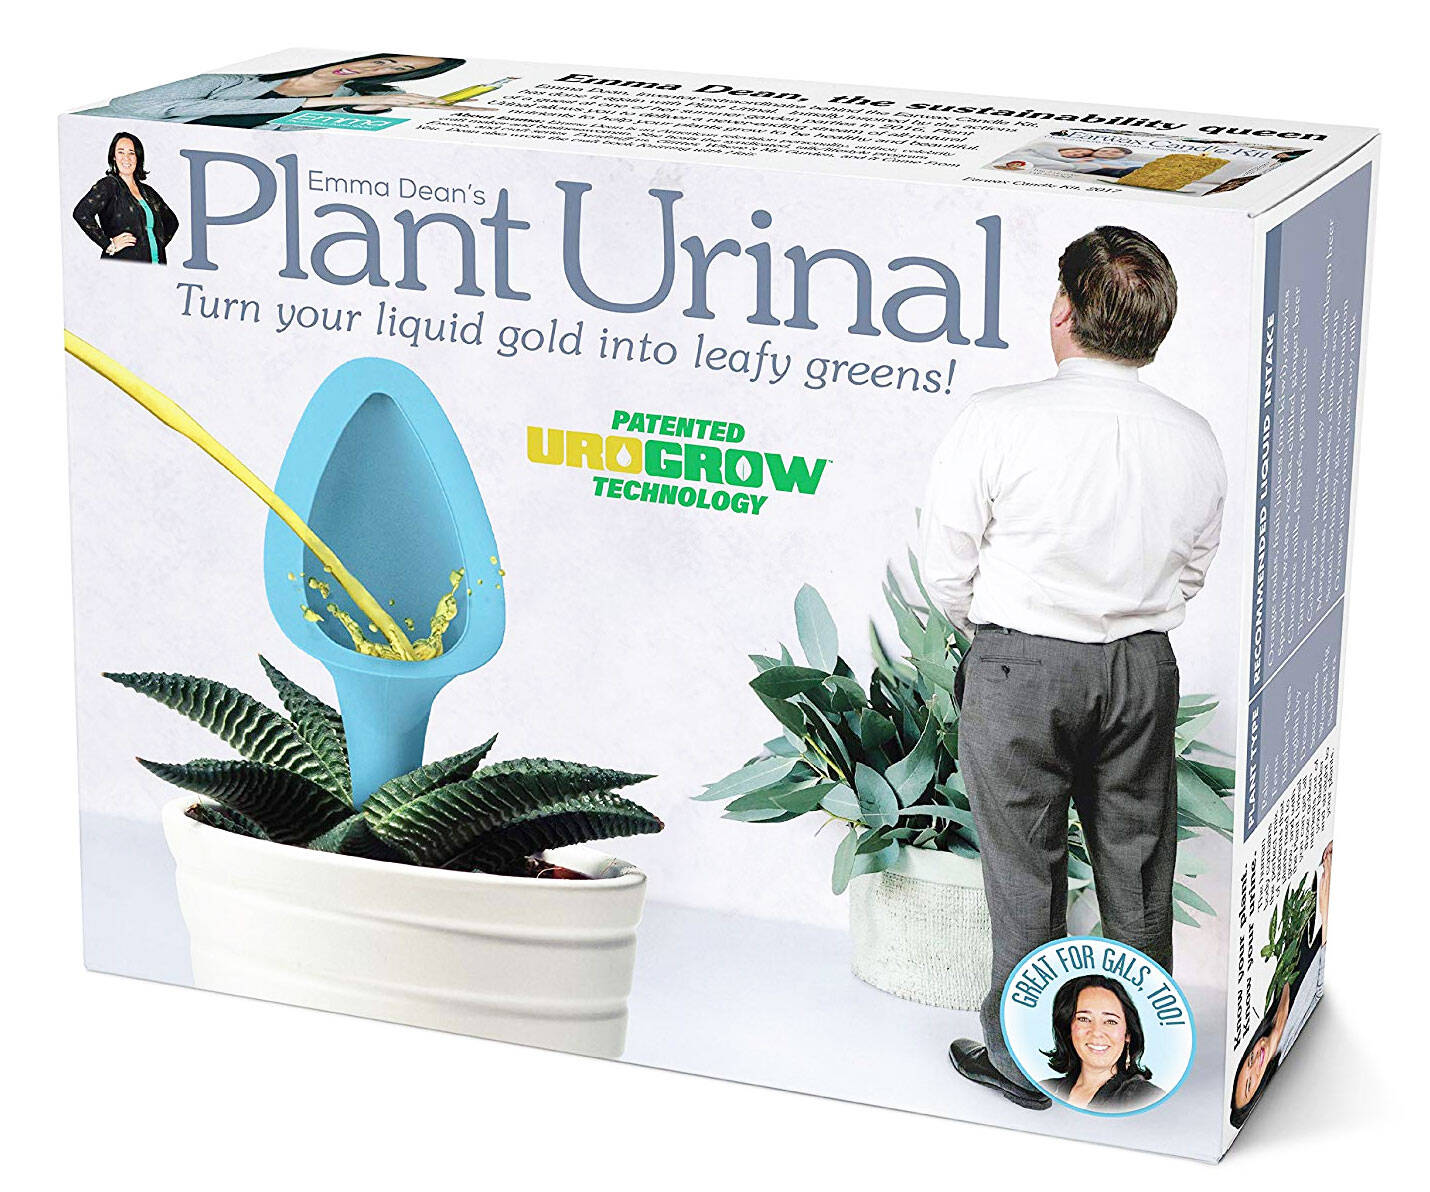 The Plant Urinal - //coolthings.us